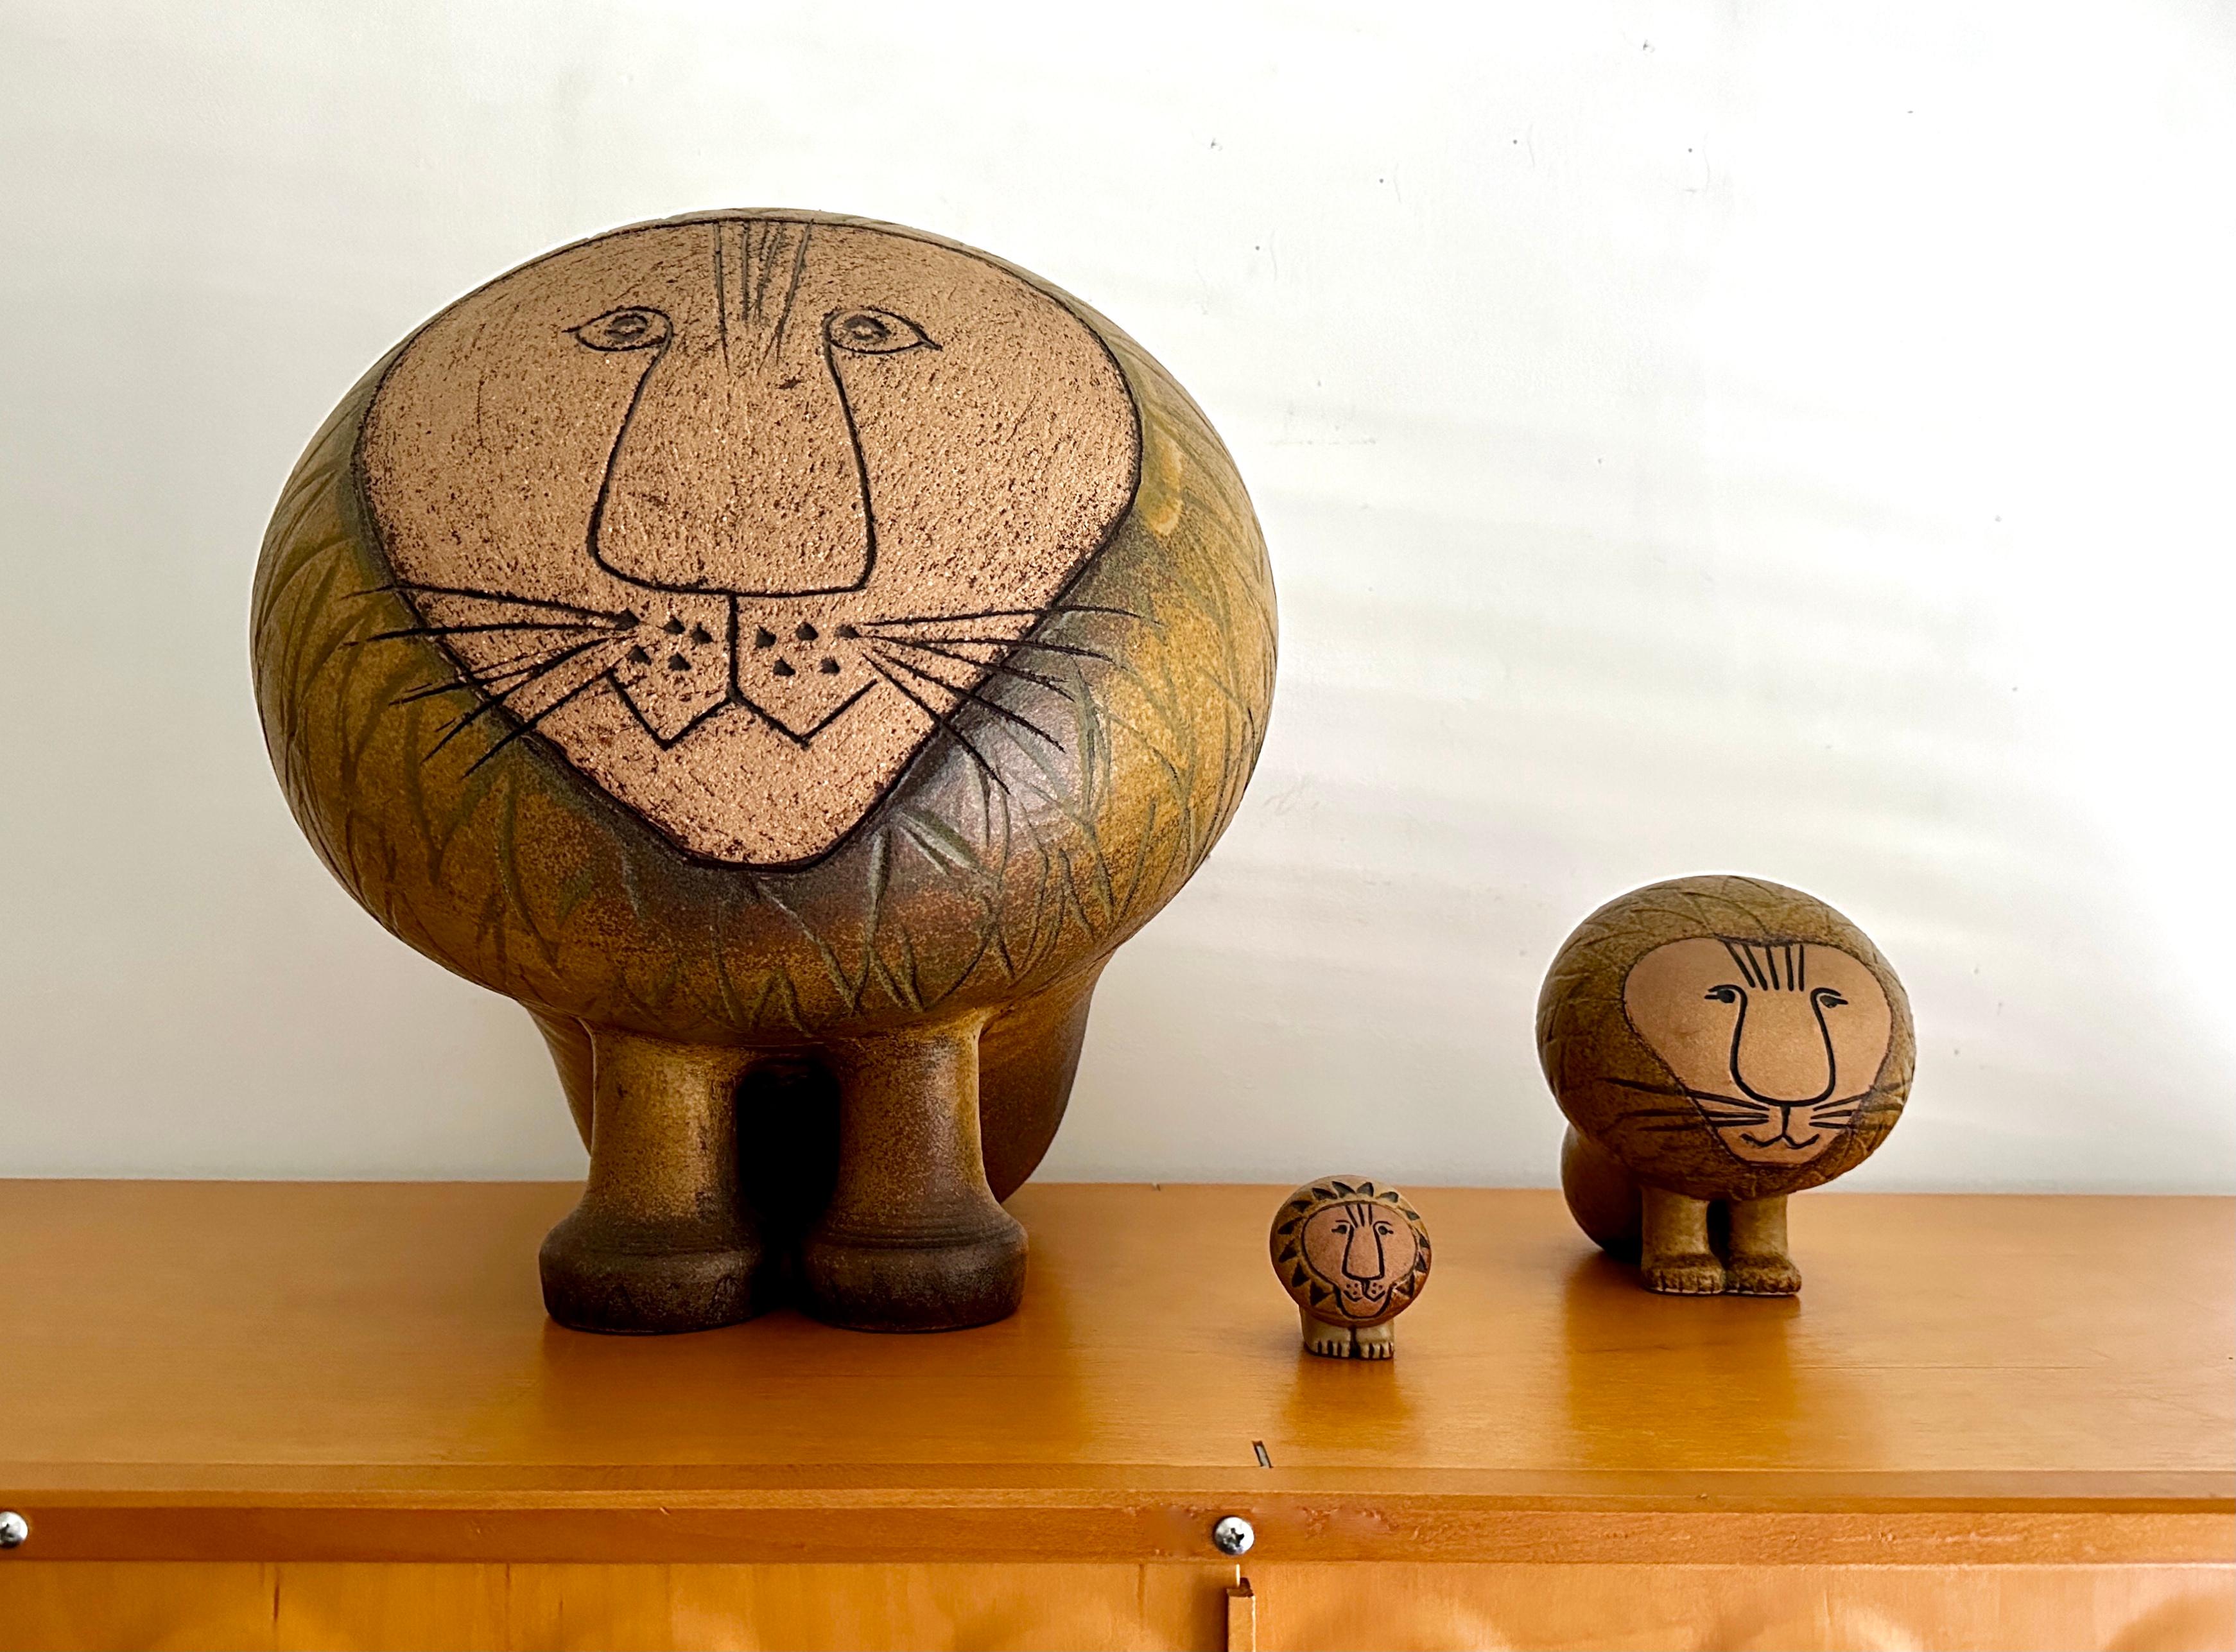 Three lions in varying sizes designed by noted designer and ceramicist Lisa Larson. The lions are from the Afrika series, designed in 1964. The set consists of a mini, large and gigantic lion. Produced in the 1960’s - 1980’s by the Gustavsberg